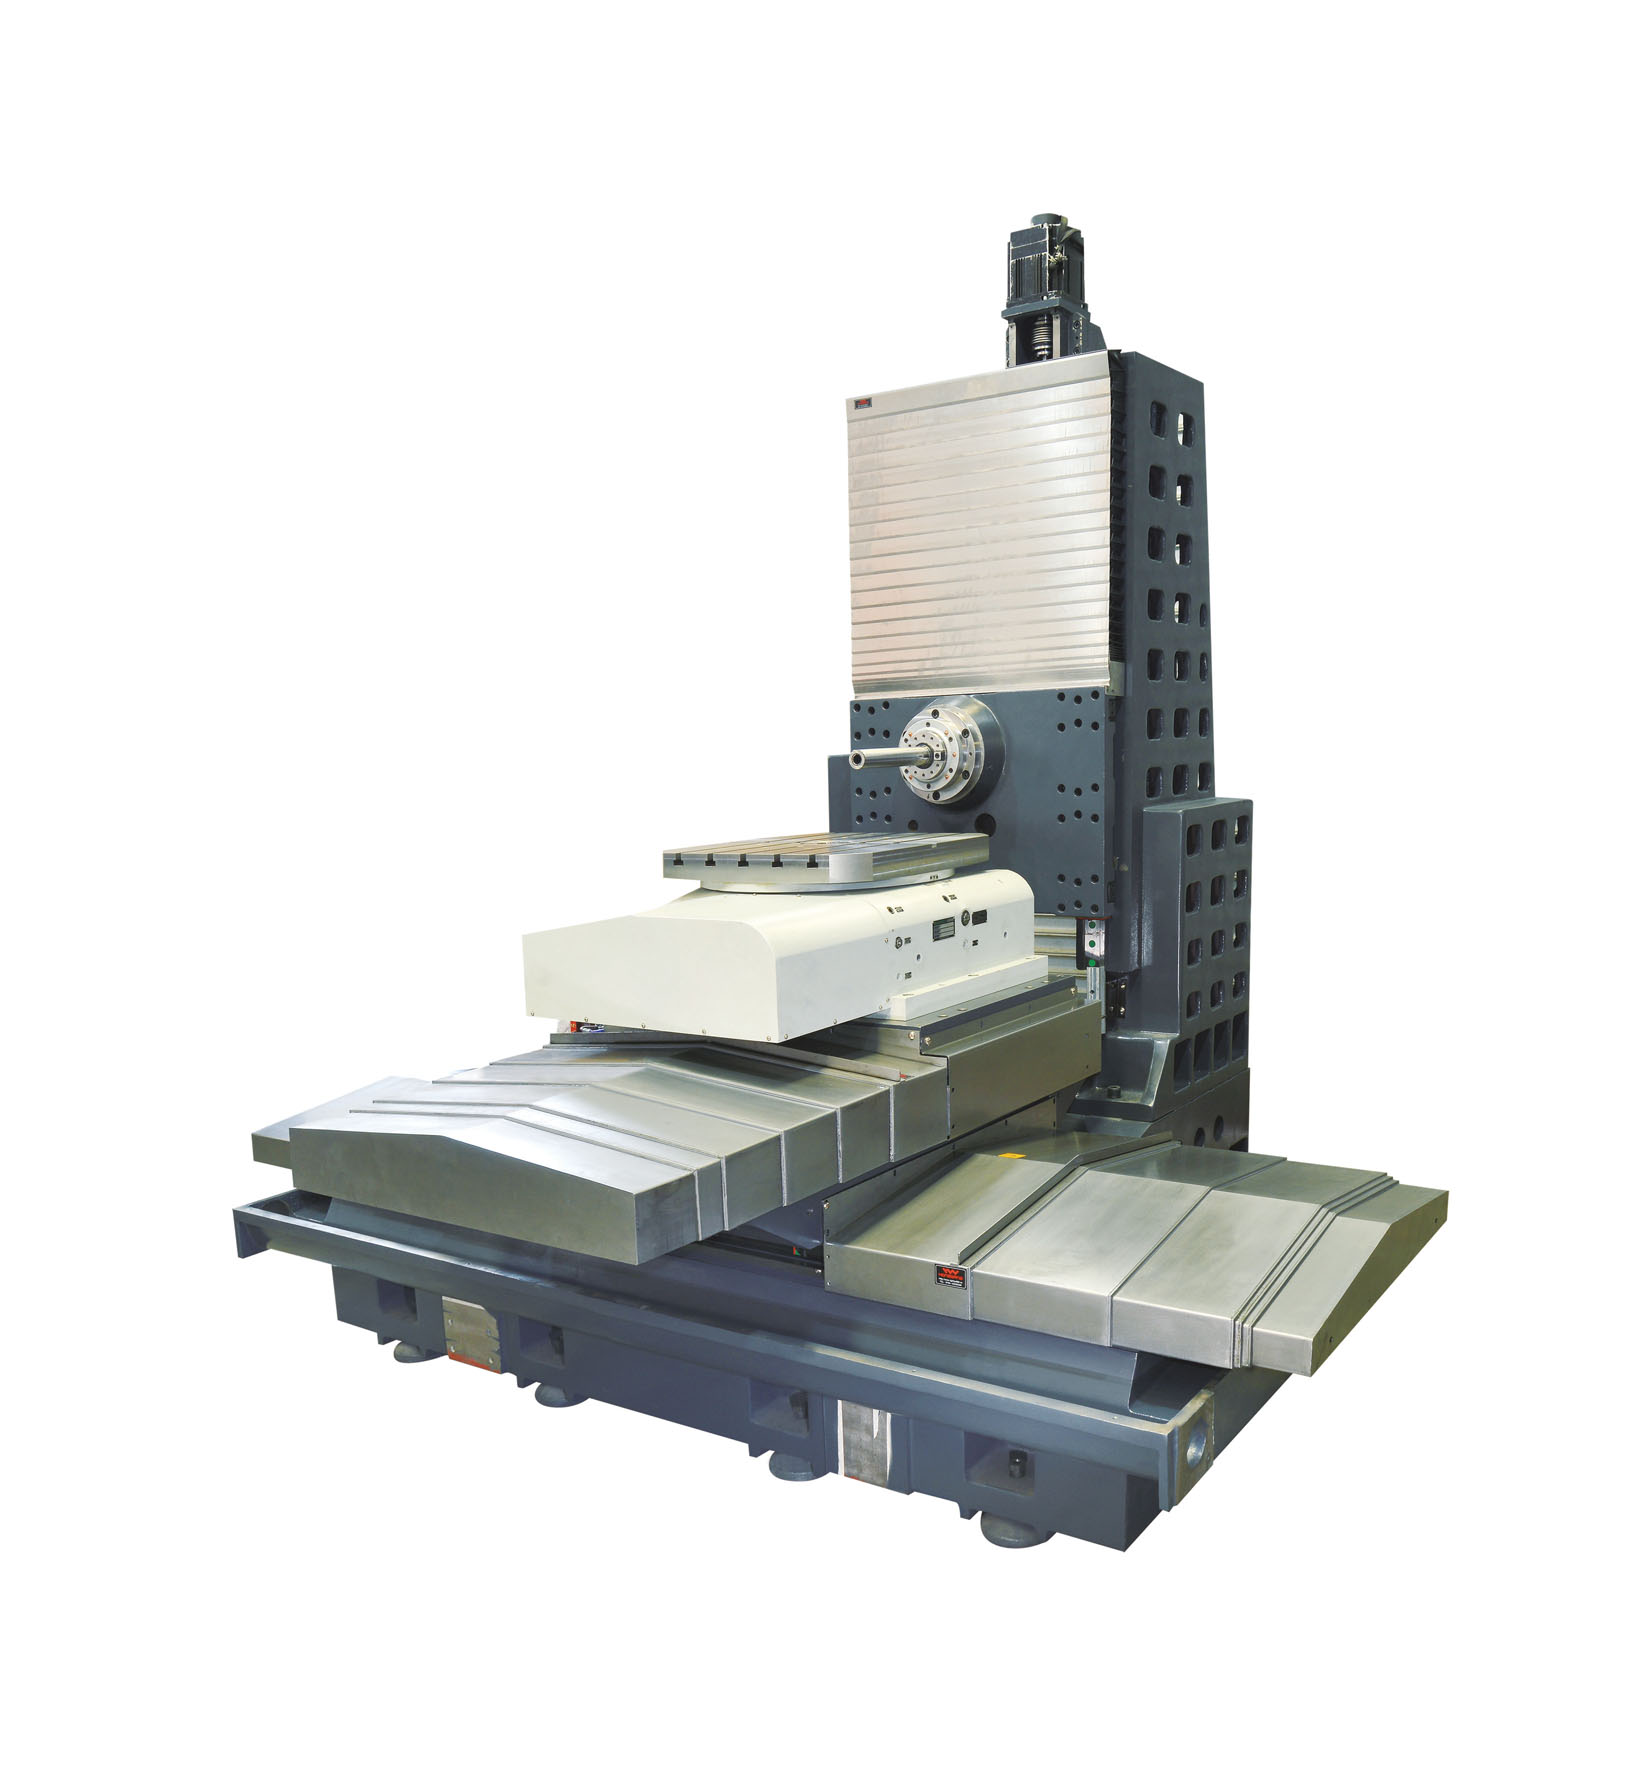 The difference between vertical machining center and horizontal machining center